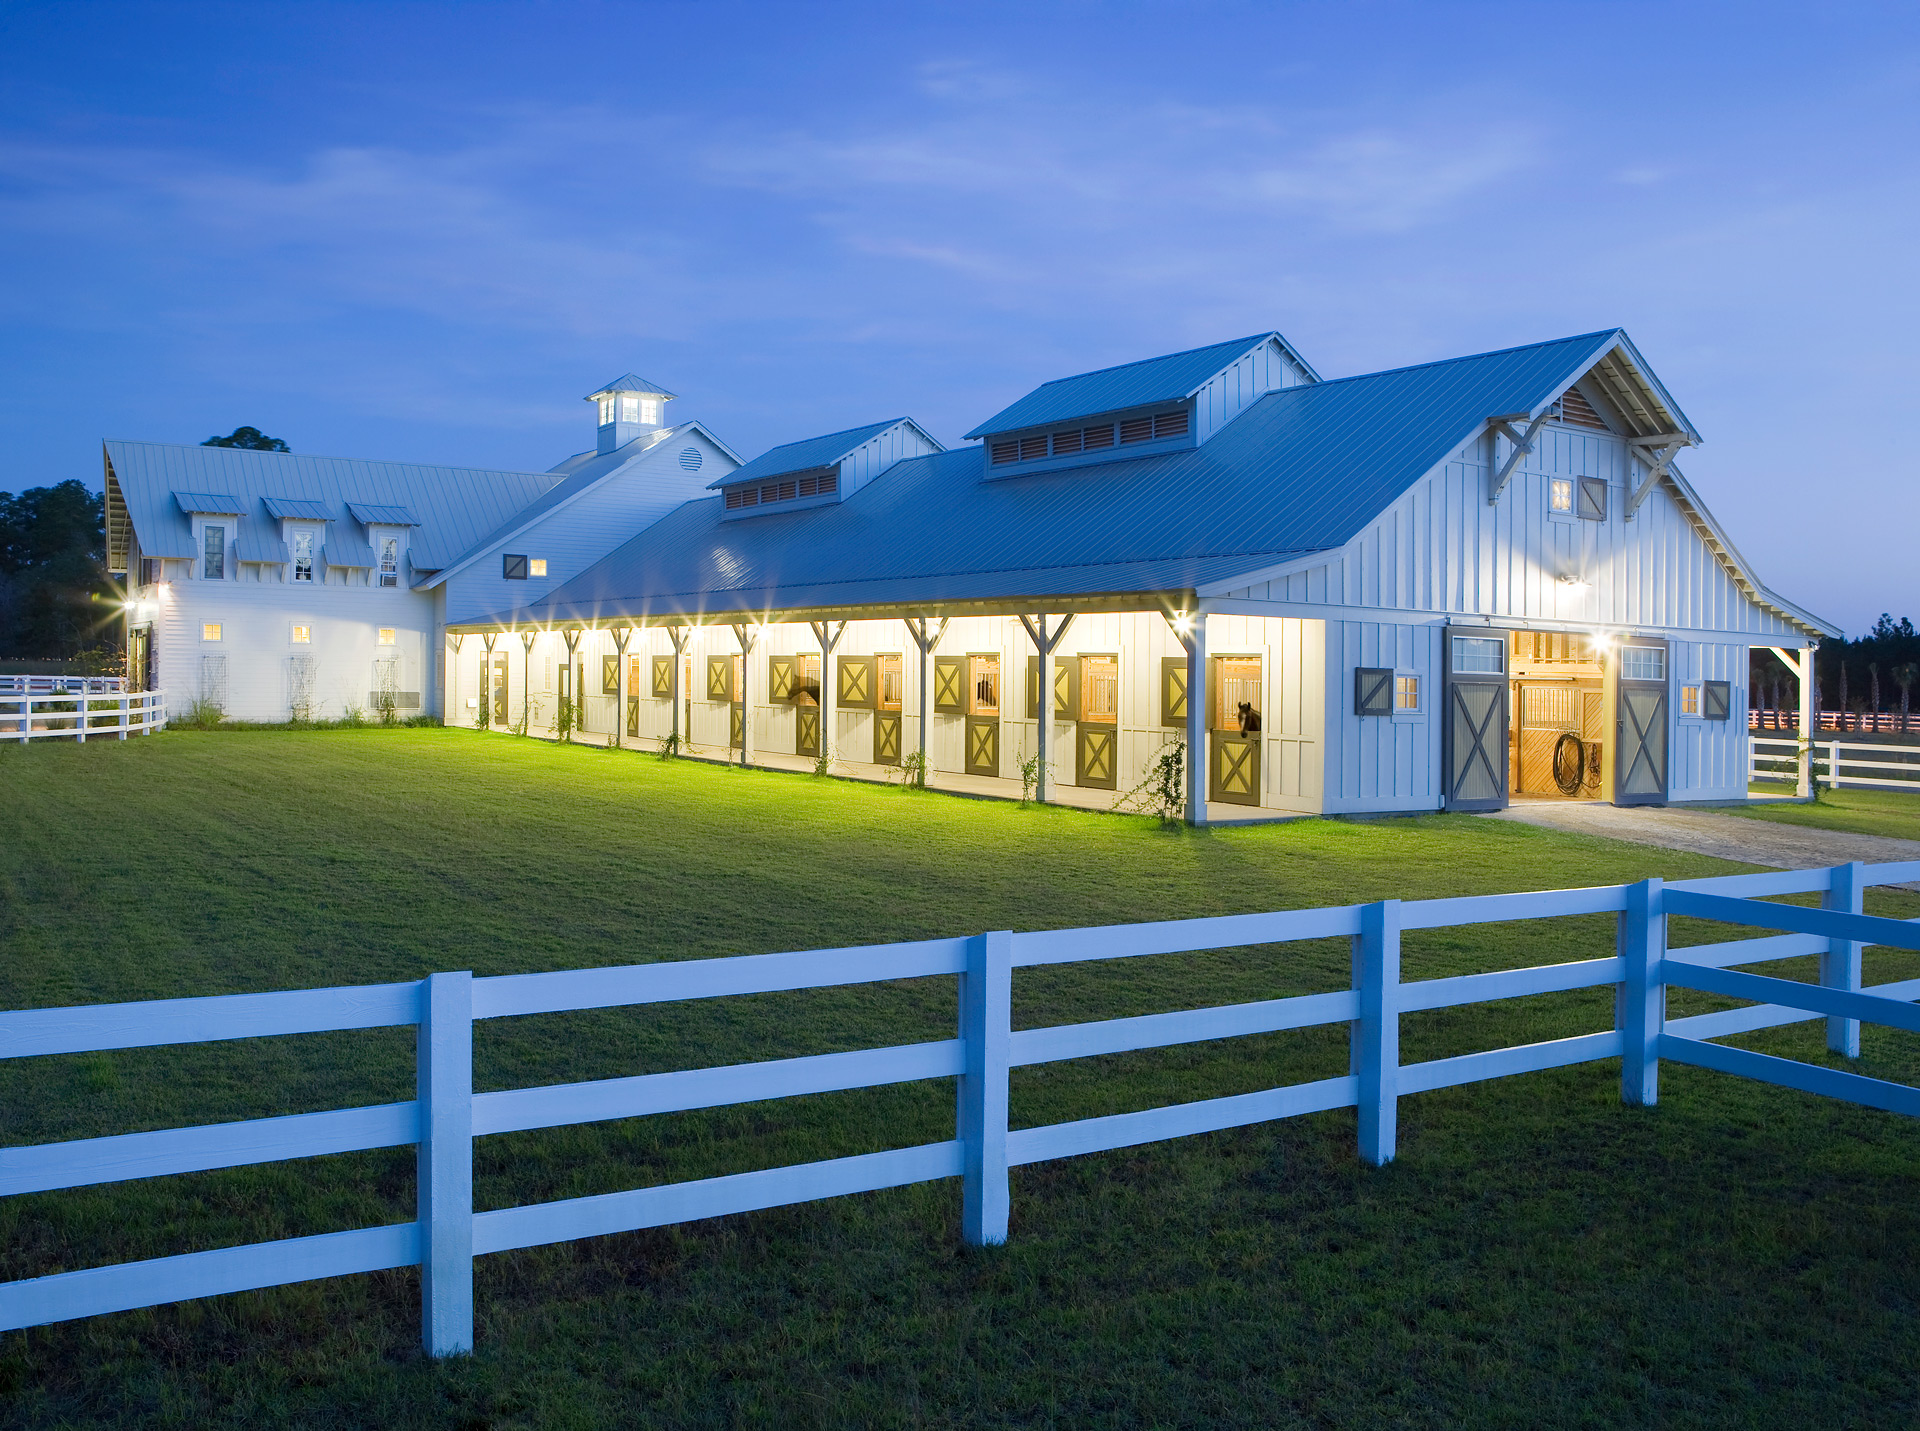 equestrian center at dusk with yellow lights and blue sky above green grass